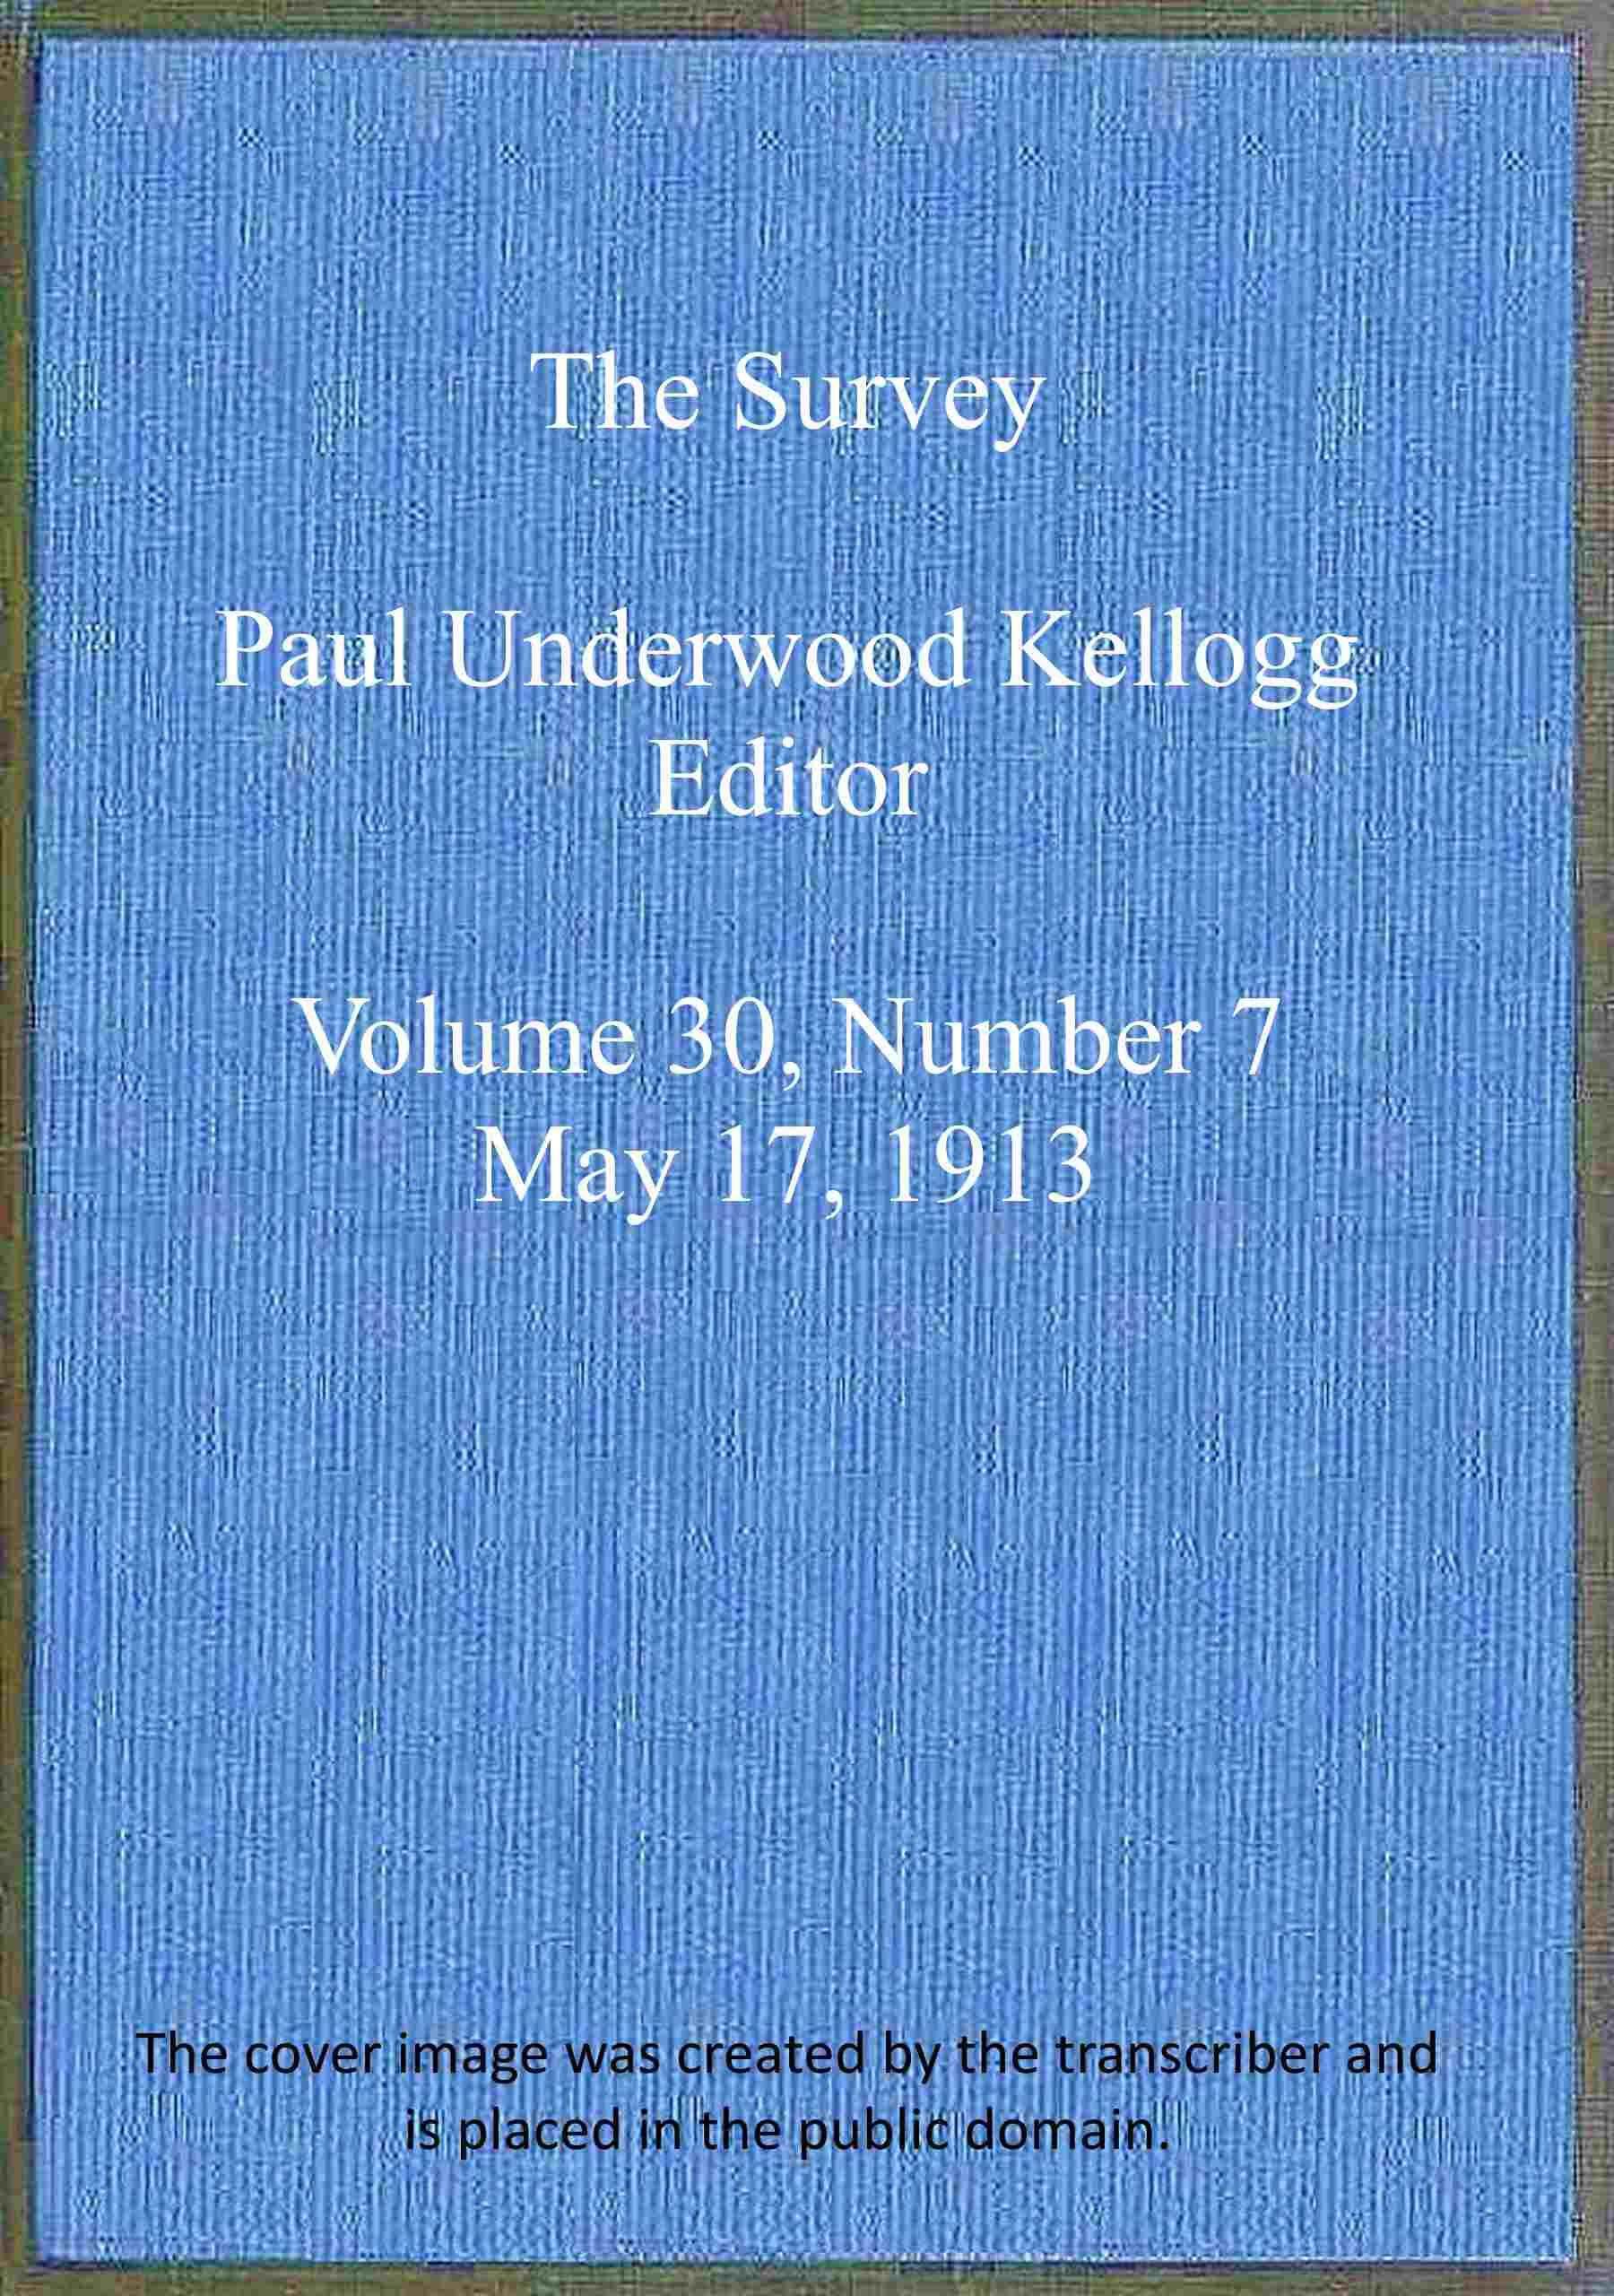 The Survey, Volume 30, Number 7, May 17, 1913 Project Gutenberg photo image